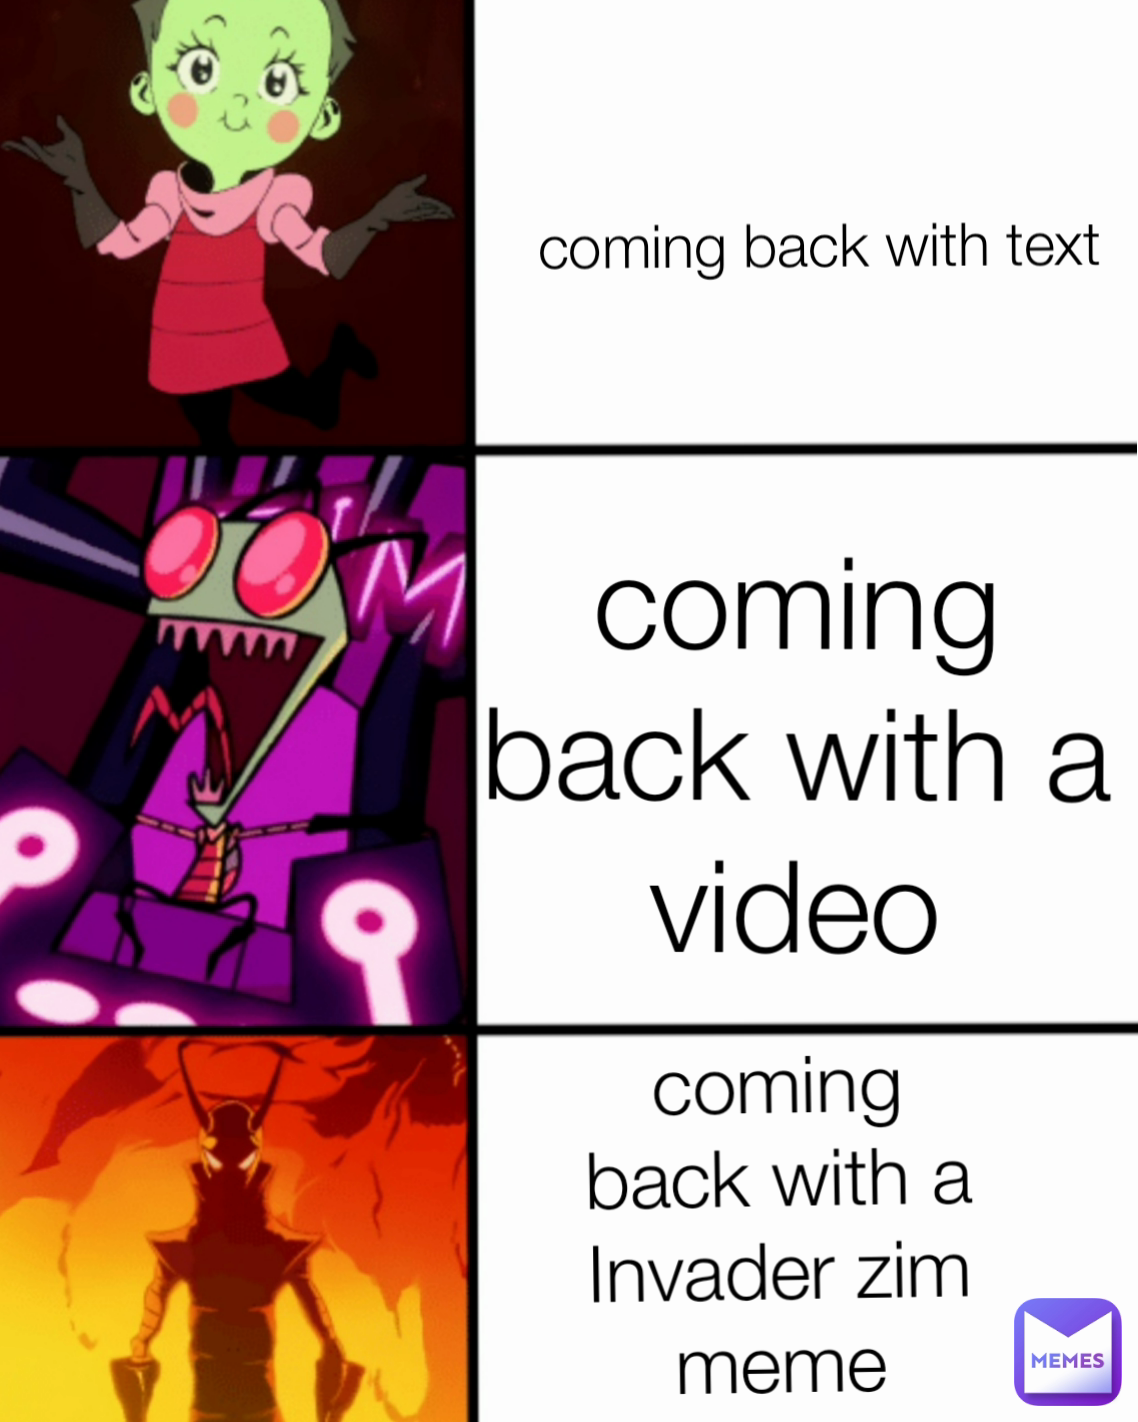 coming back with a Invader zim meme coming back with a video coming back with text